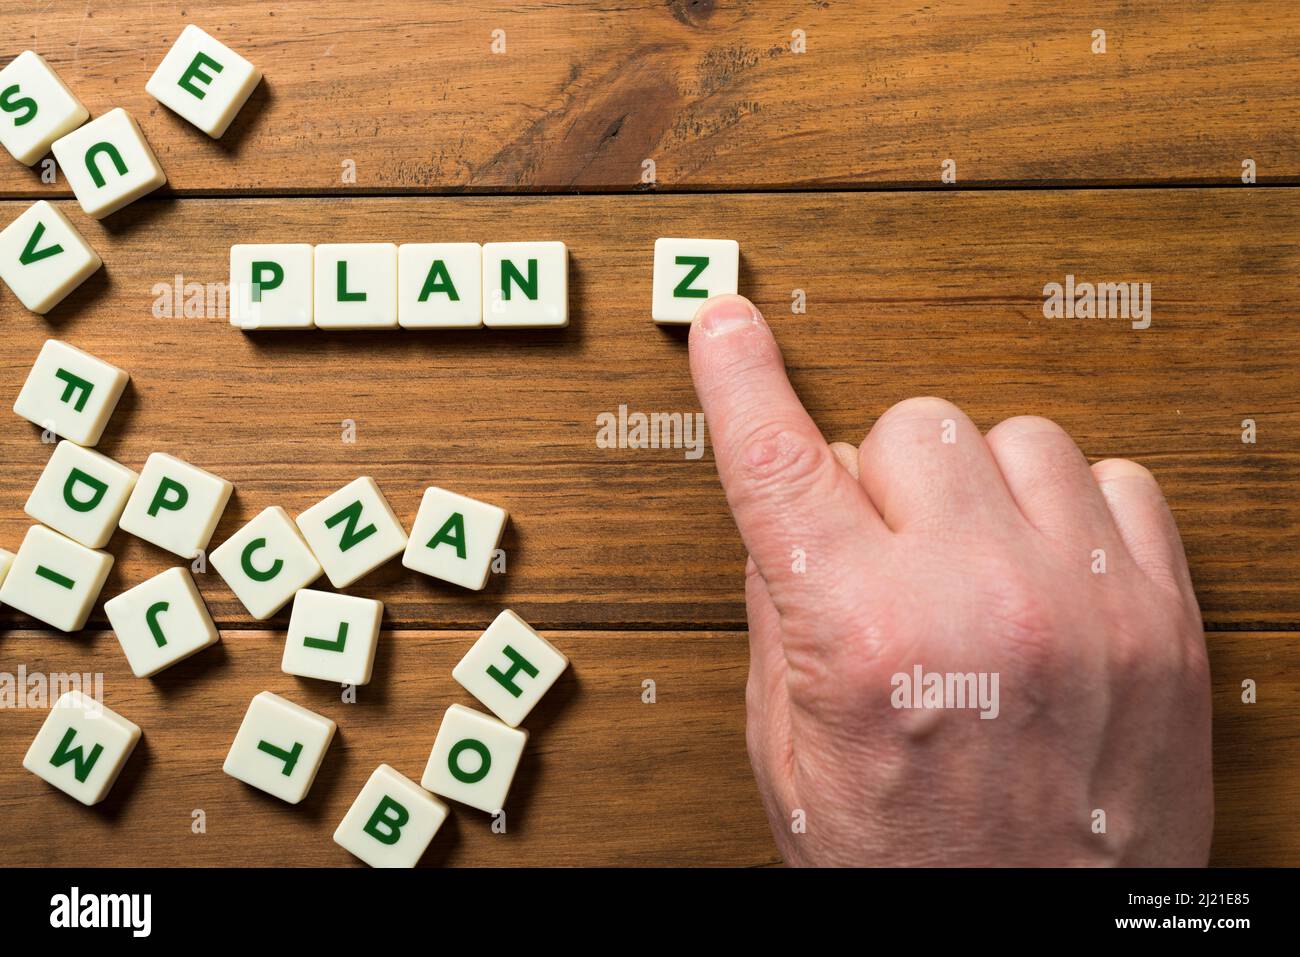 A hand places a piece with the letter Z next to the word PLAN; around it other letters appear in disarray. Concept of planning for the future, resilie Stock Photo